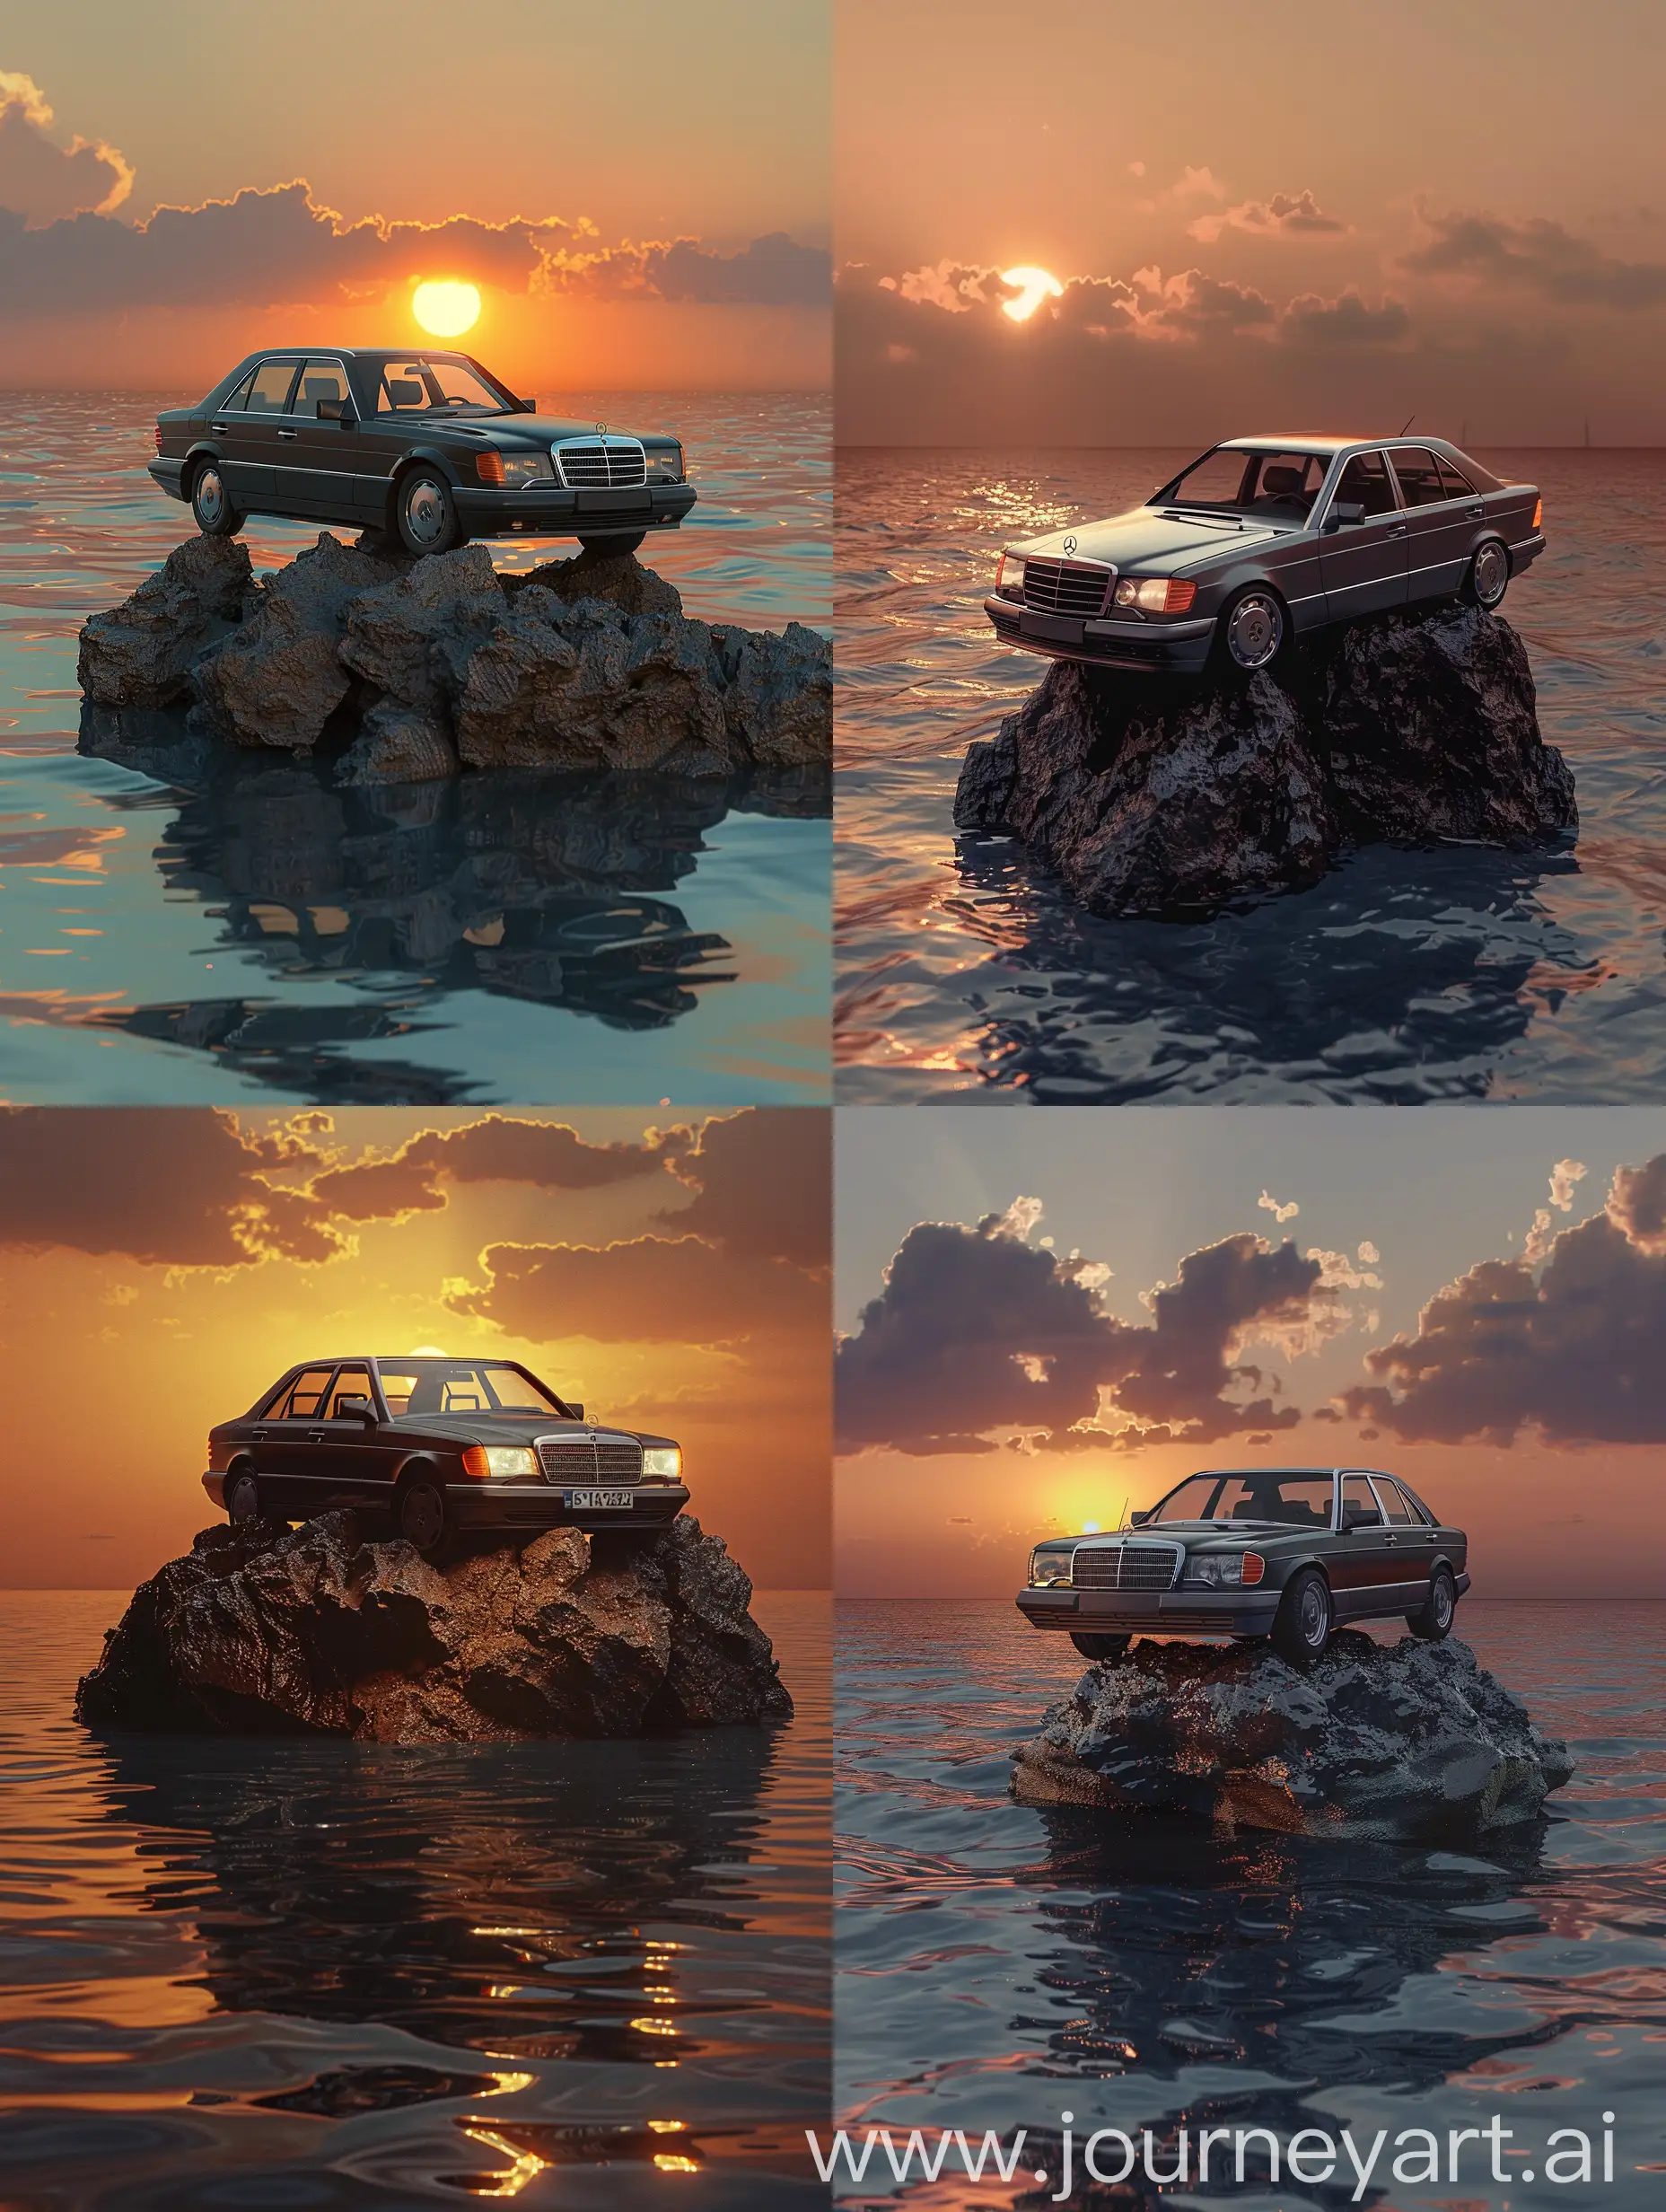 Luxury-Mercedes-Benz-S320-on-Tiny-Island-in-Sunset-Seascape